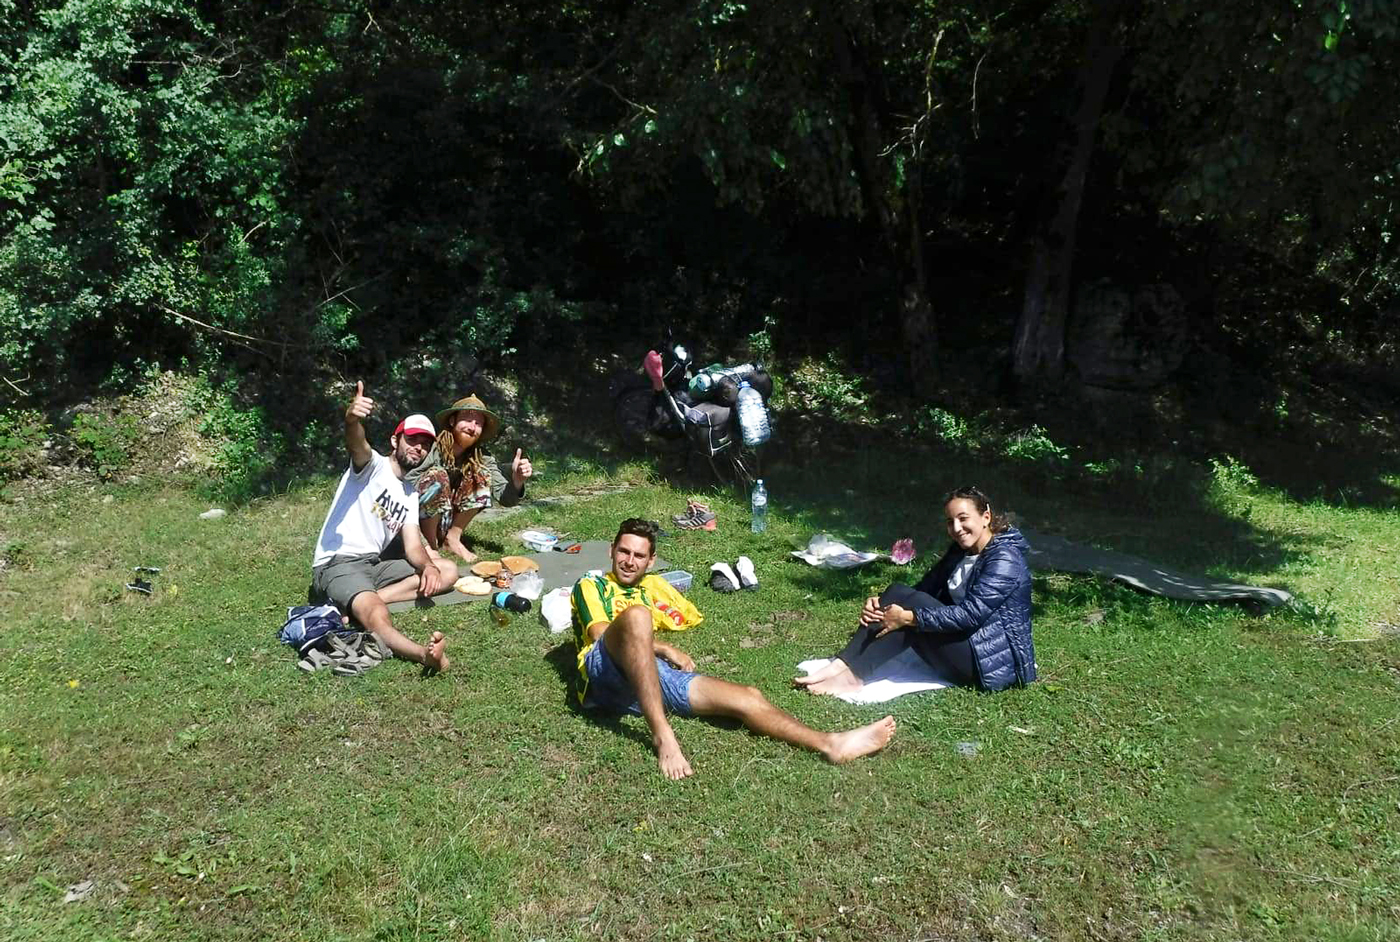 Cycling, Azerbaijan Cycling, crossing the Caucasus region by bike, lunch on the grass after Balakən. Cycling travel, biketouring, cycling Caucasus, cycling Azerbaijan, lunch on the grass near Balakən.